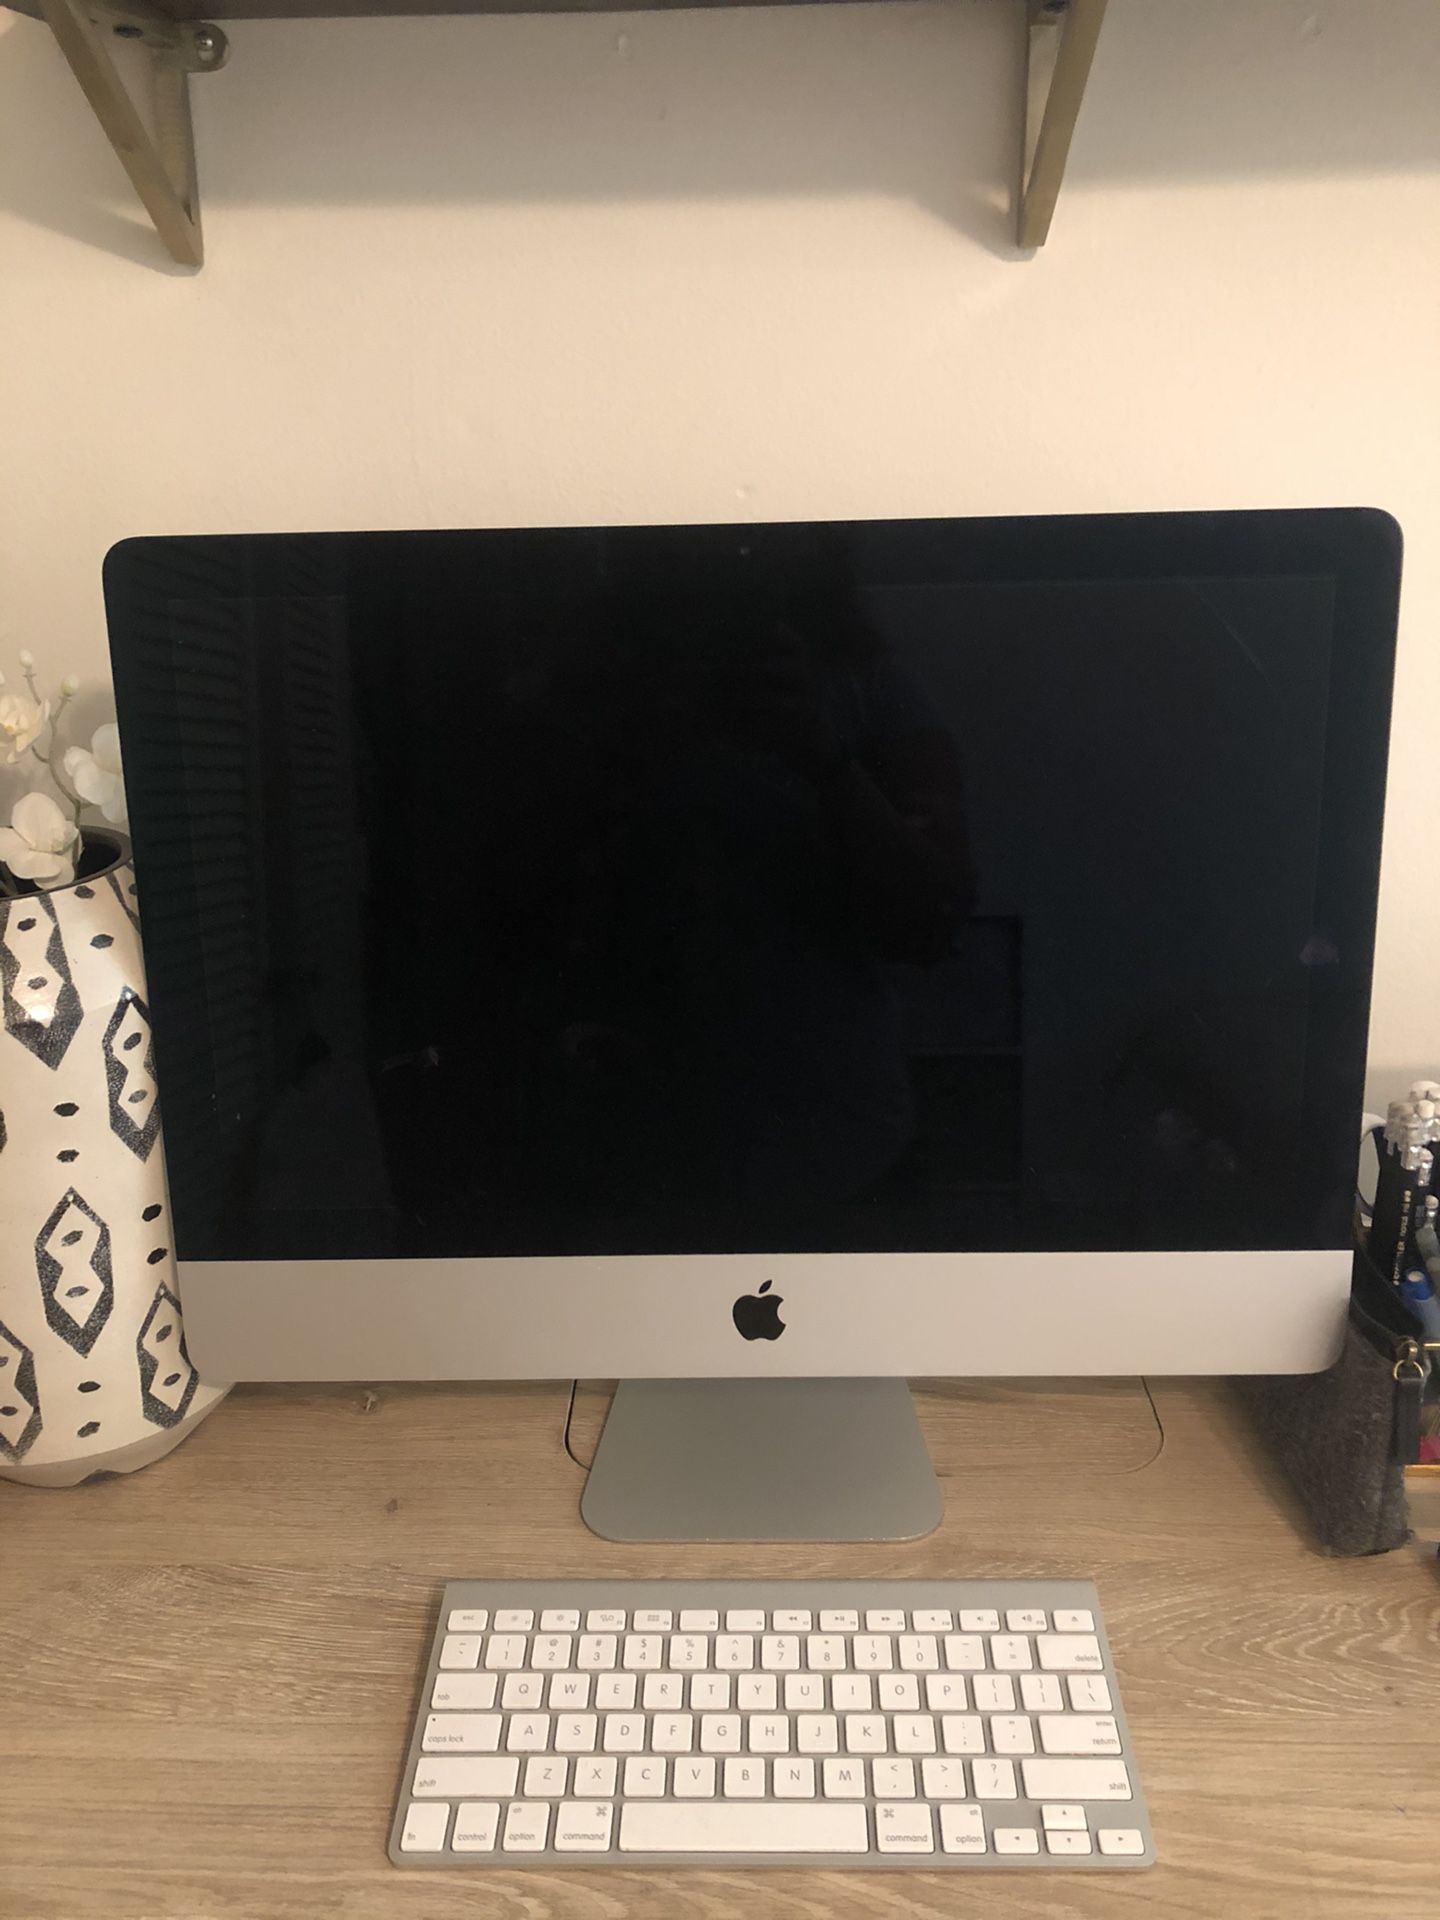 Slim 2014 21.5” iMac computer / great condition / keyboard and mouse included